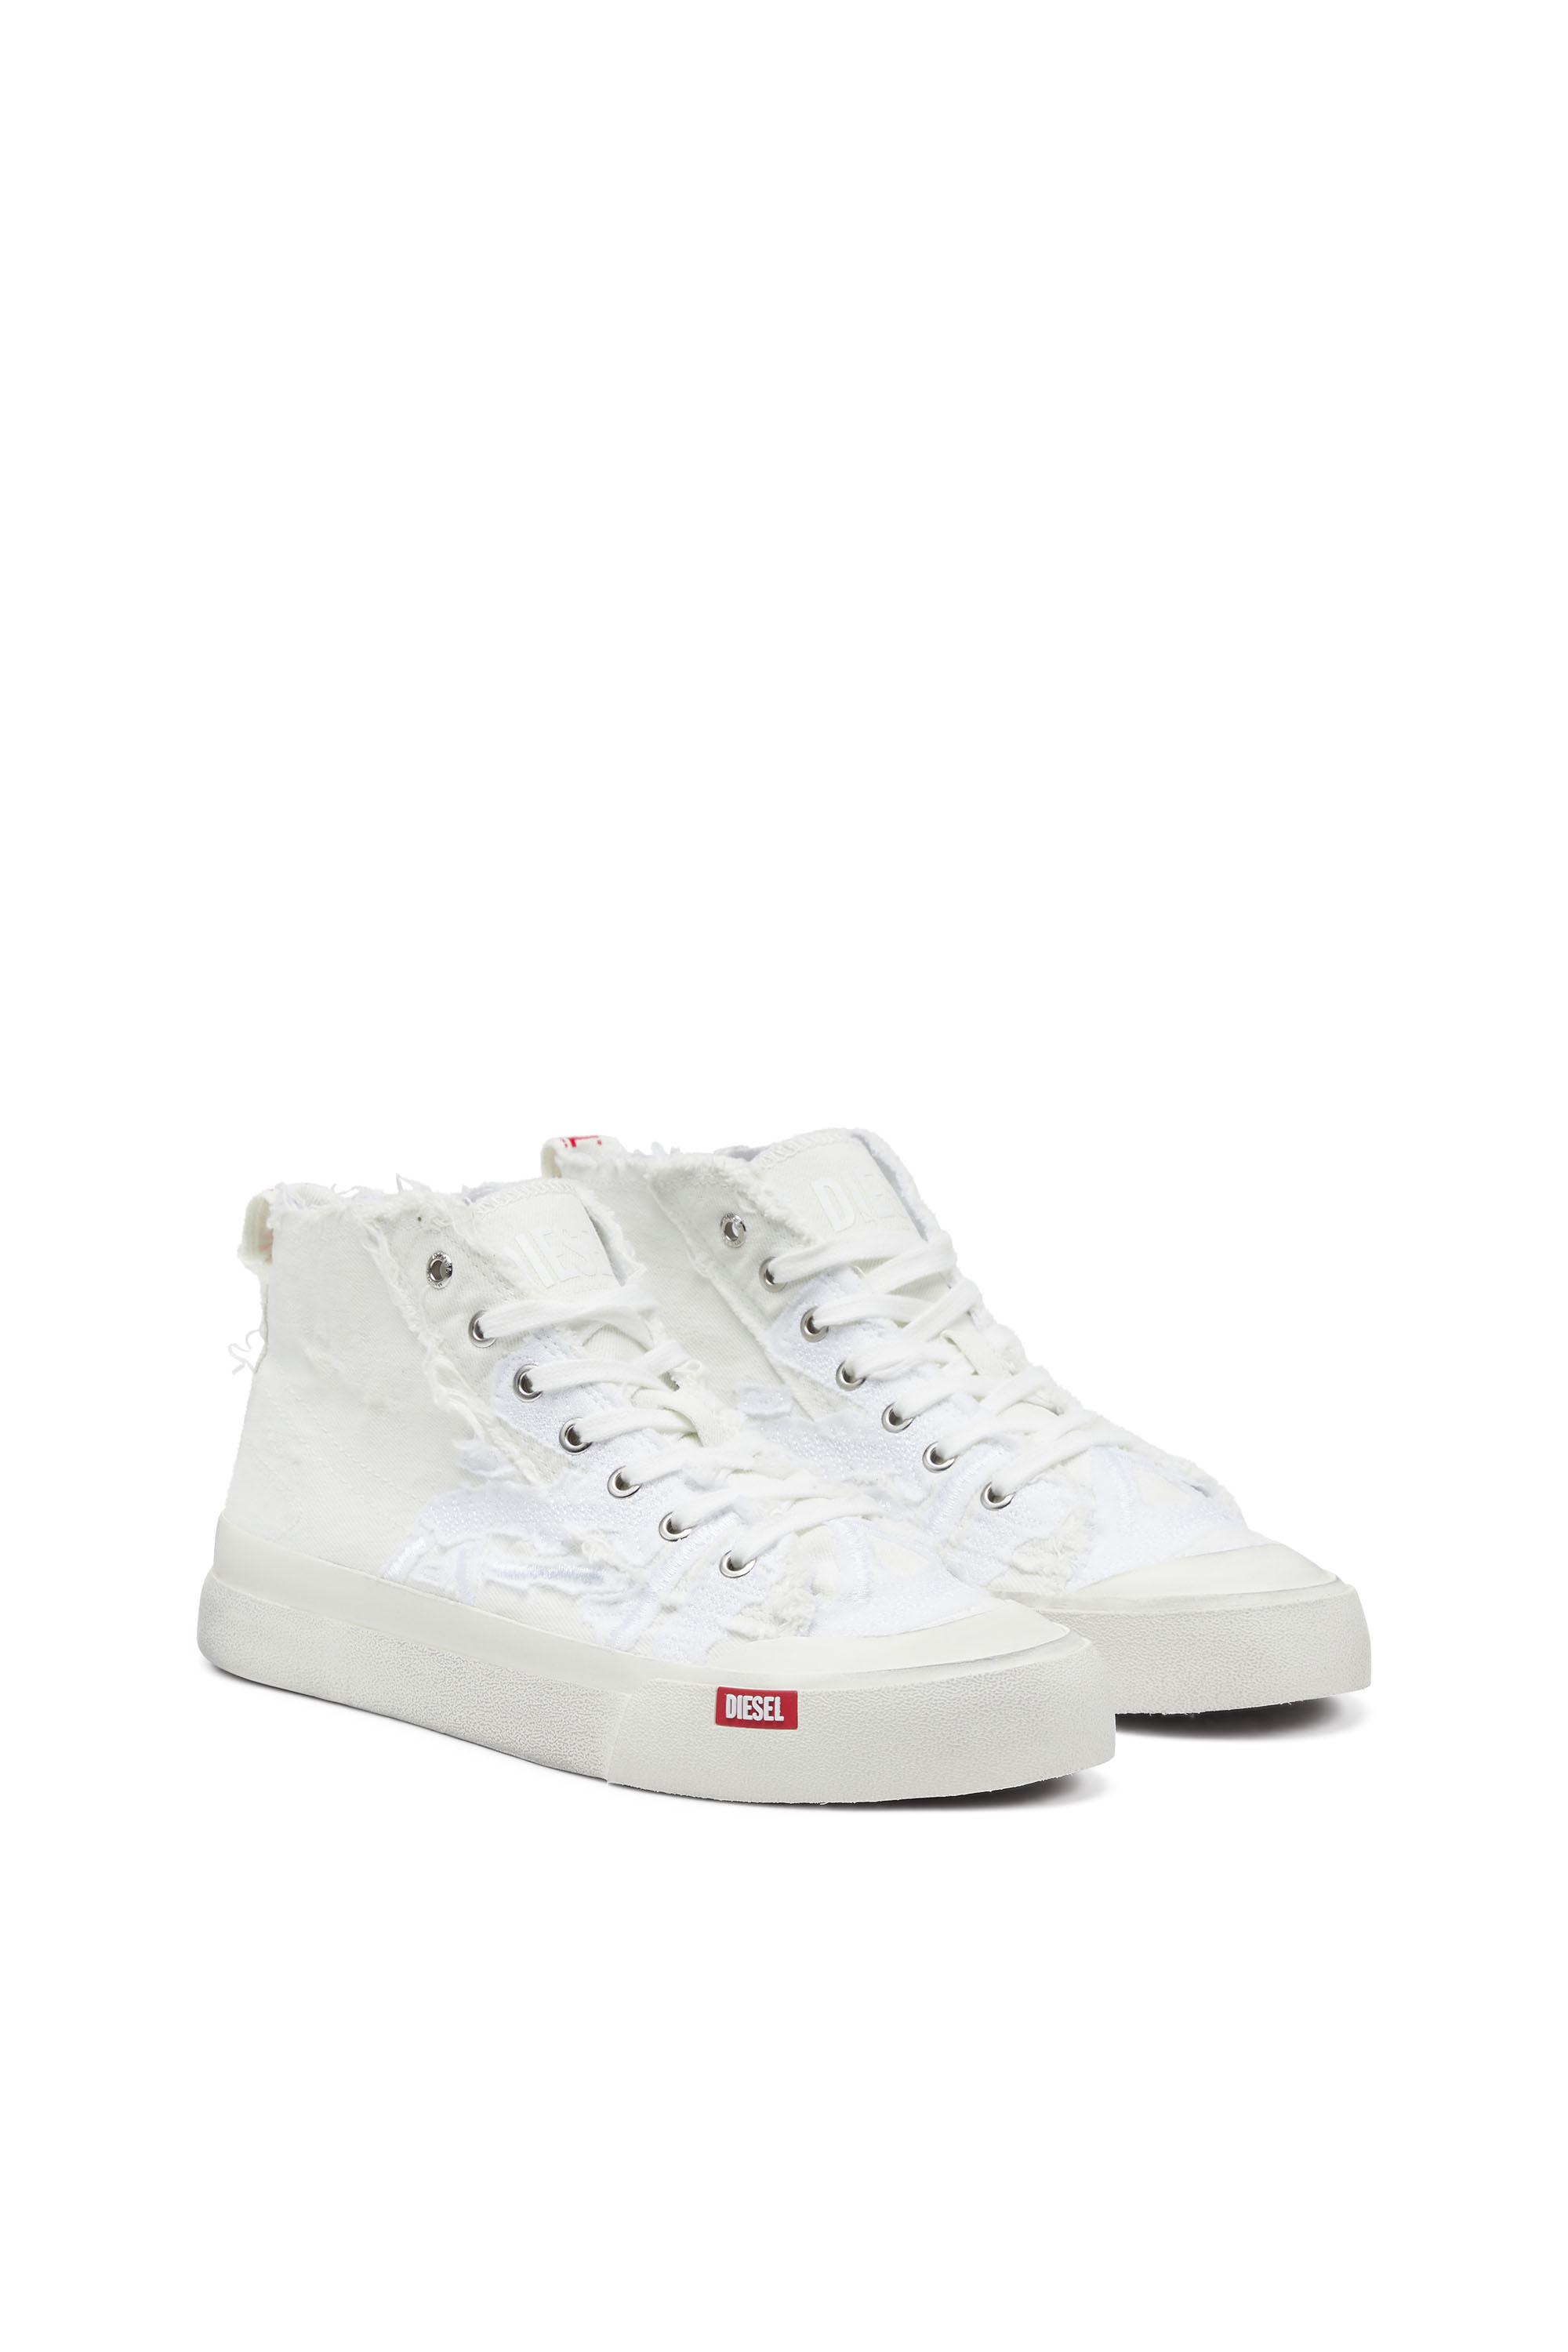 Diesel - S-ATHOS MID, Male S-Athos Mid-Destroyed gauze and denim high-top sneakers in White - Image 2